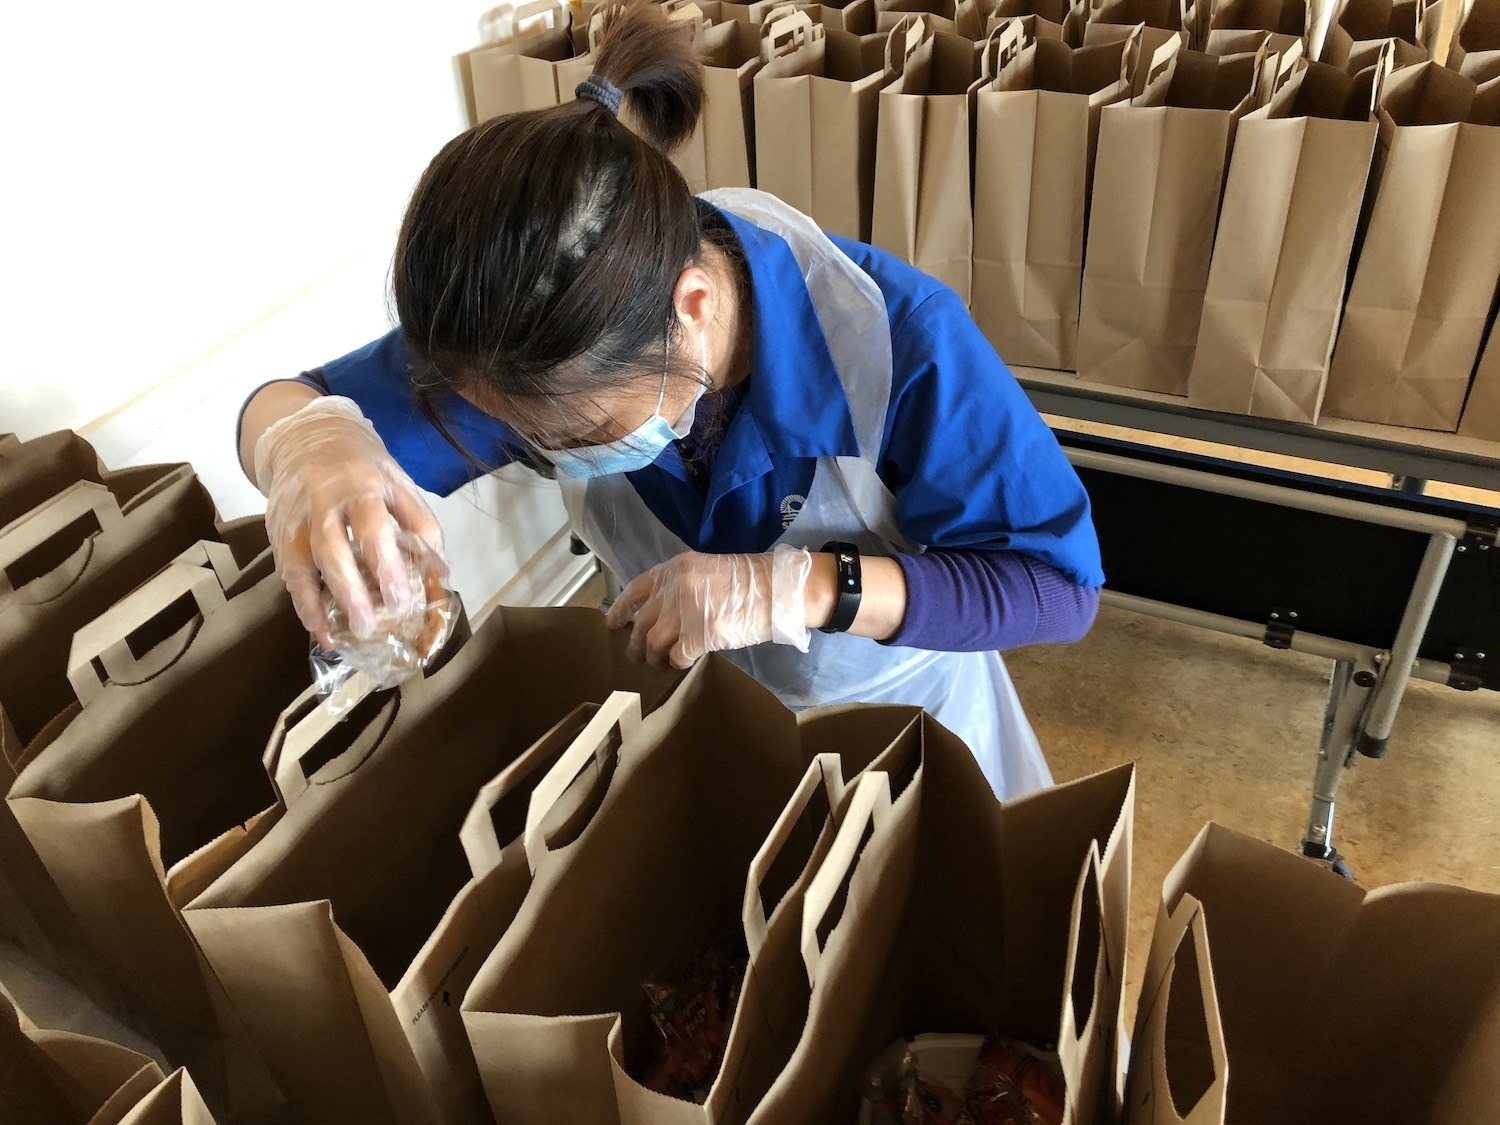 A SFUSD worker in PPE packs meal kits during the Covid-19 pandemic.